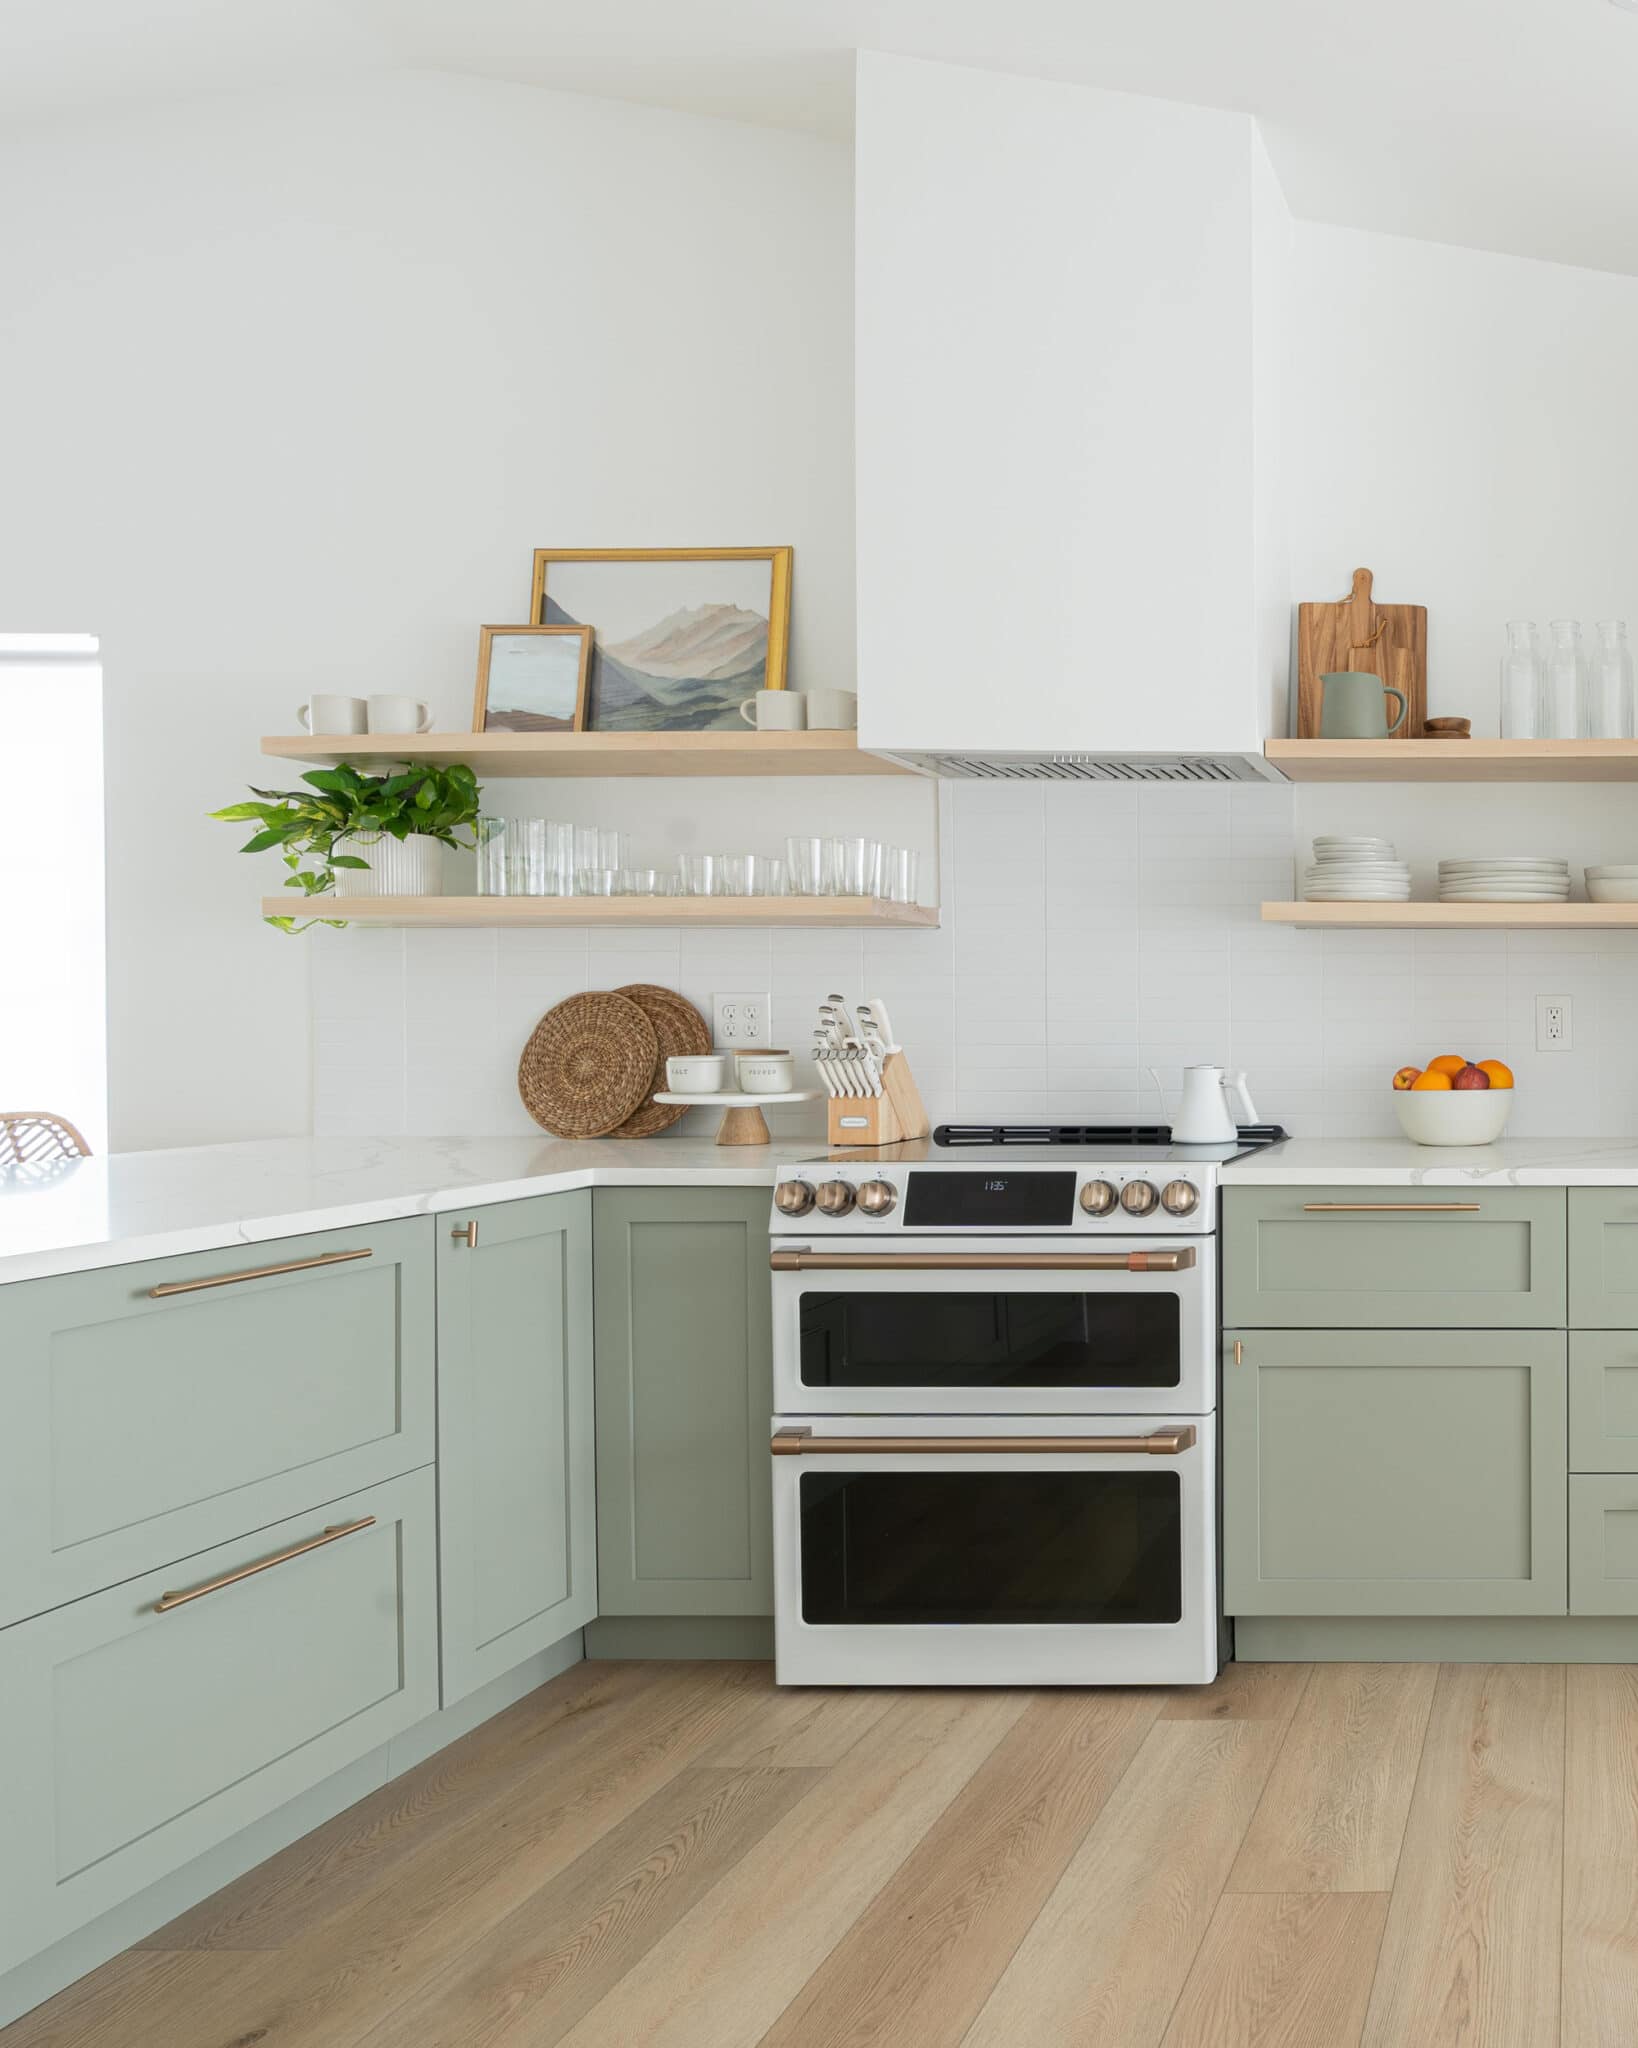 This Kitchen Paint Color Will Continue Trending in 2023